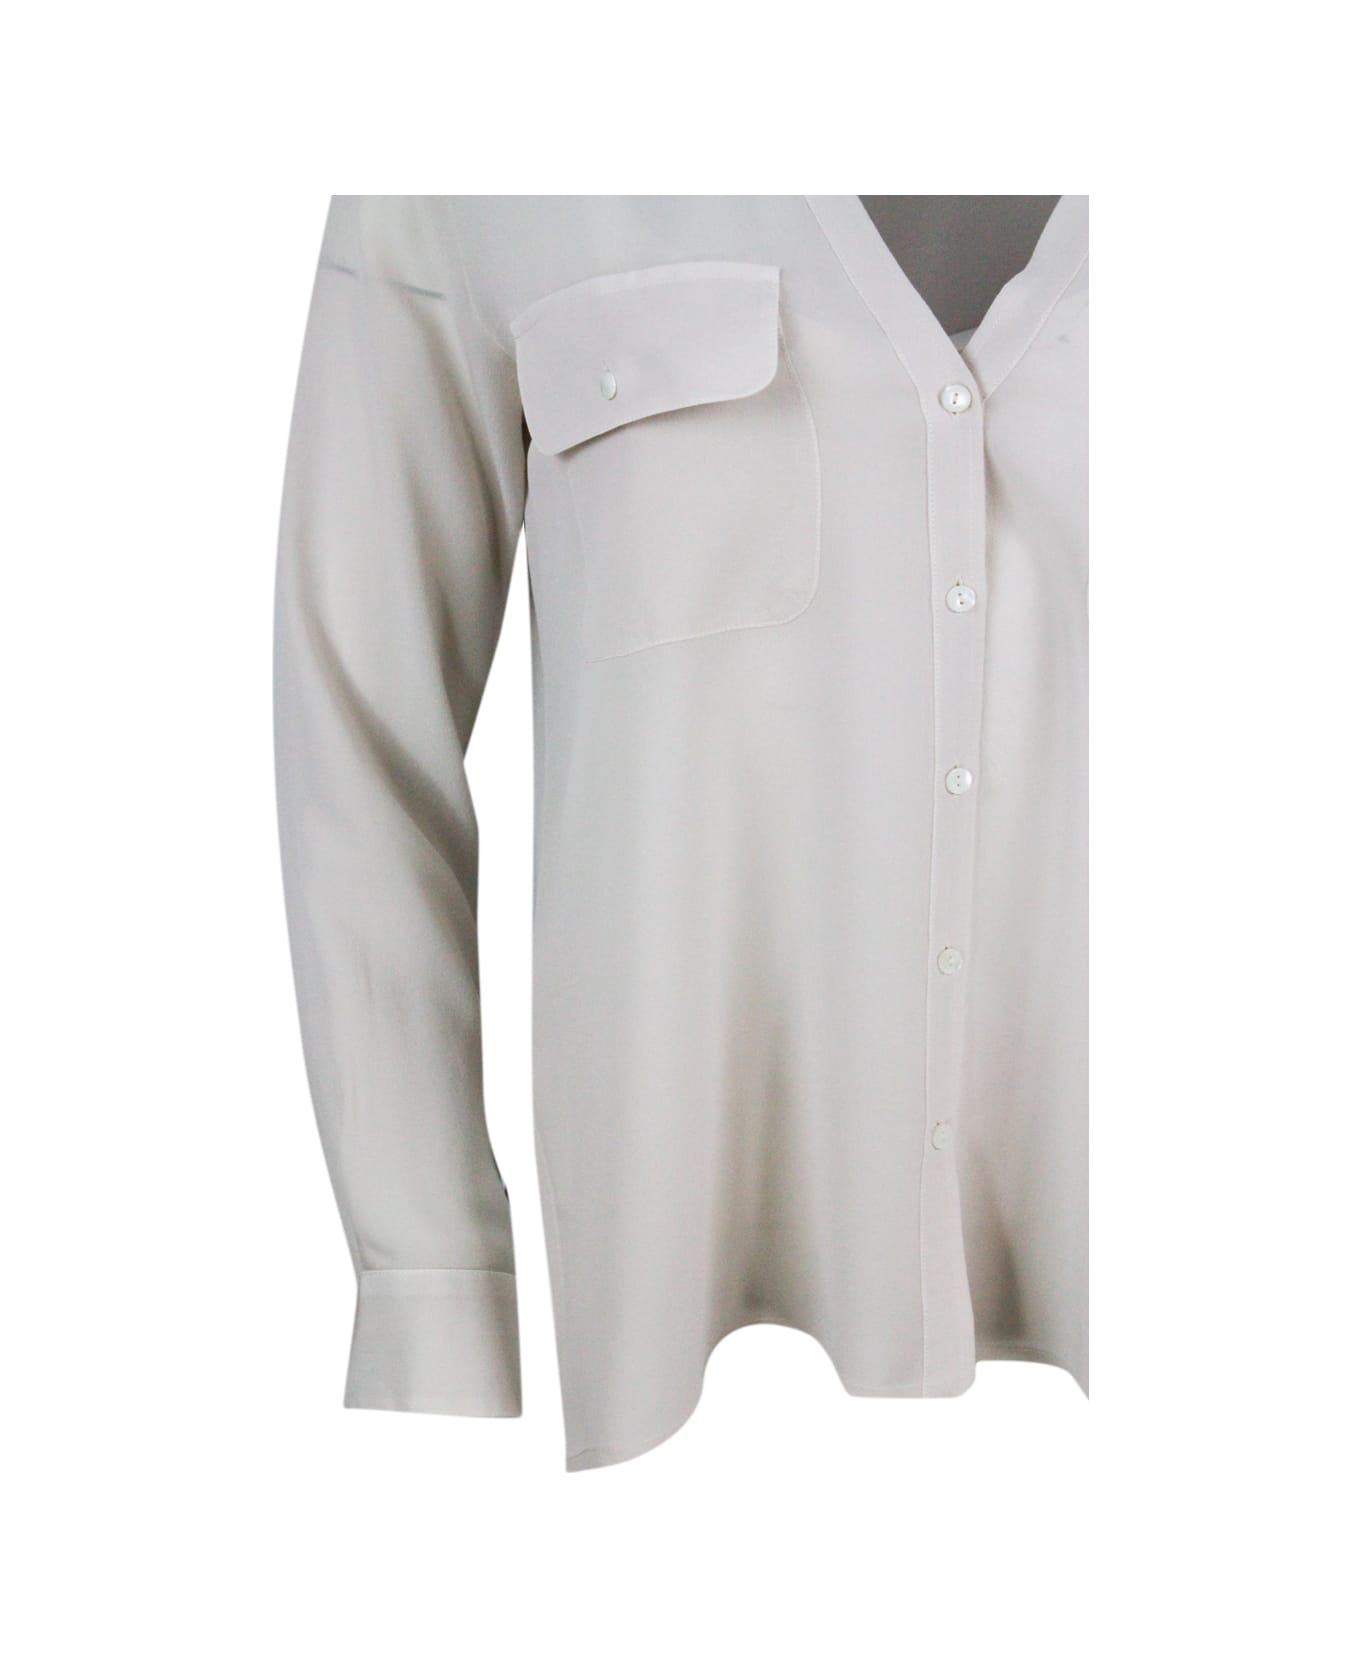 Antonelli Shirt Made Of Soft Stretch zip-up, With V-neck, WORLD Pockets And Button Closure - Beige